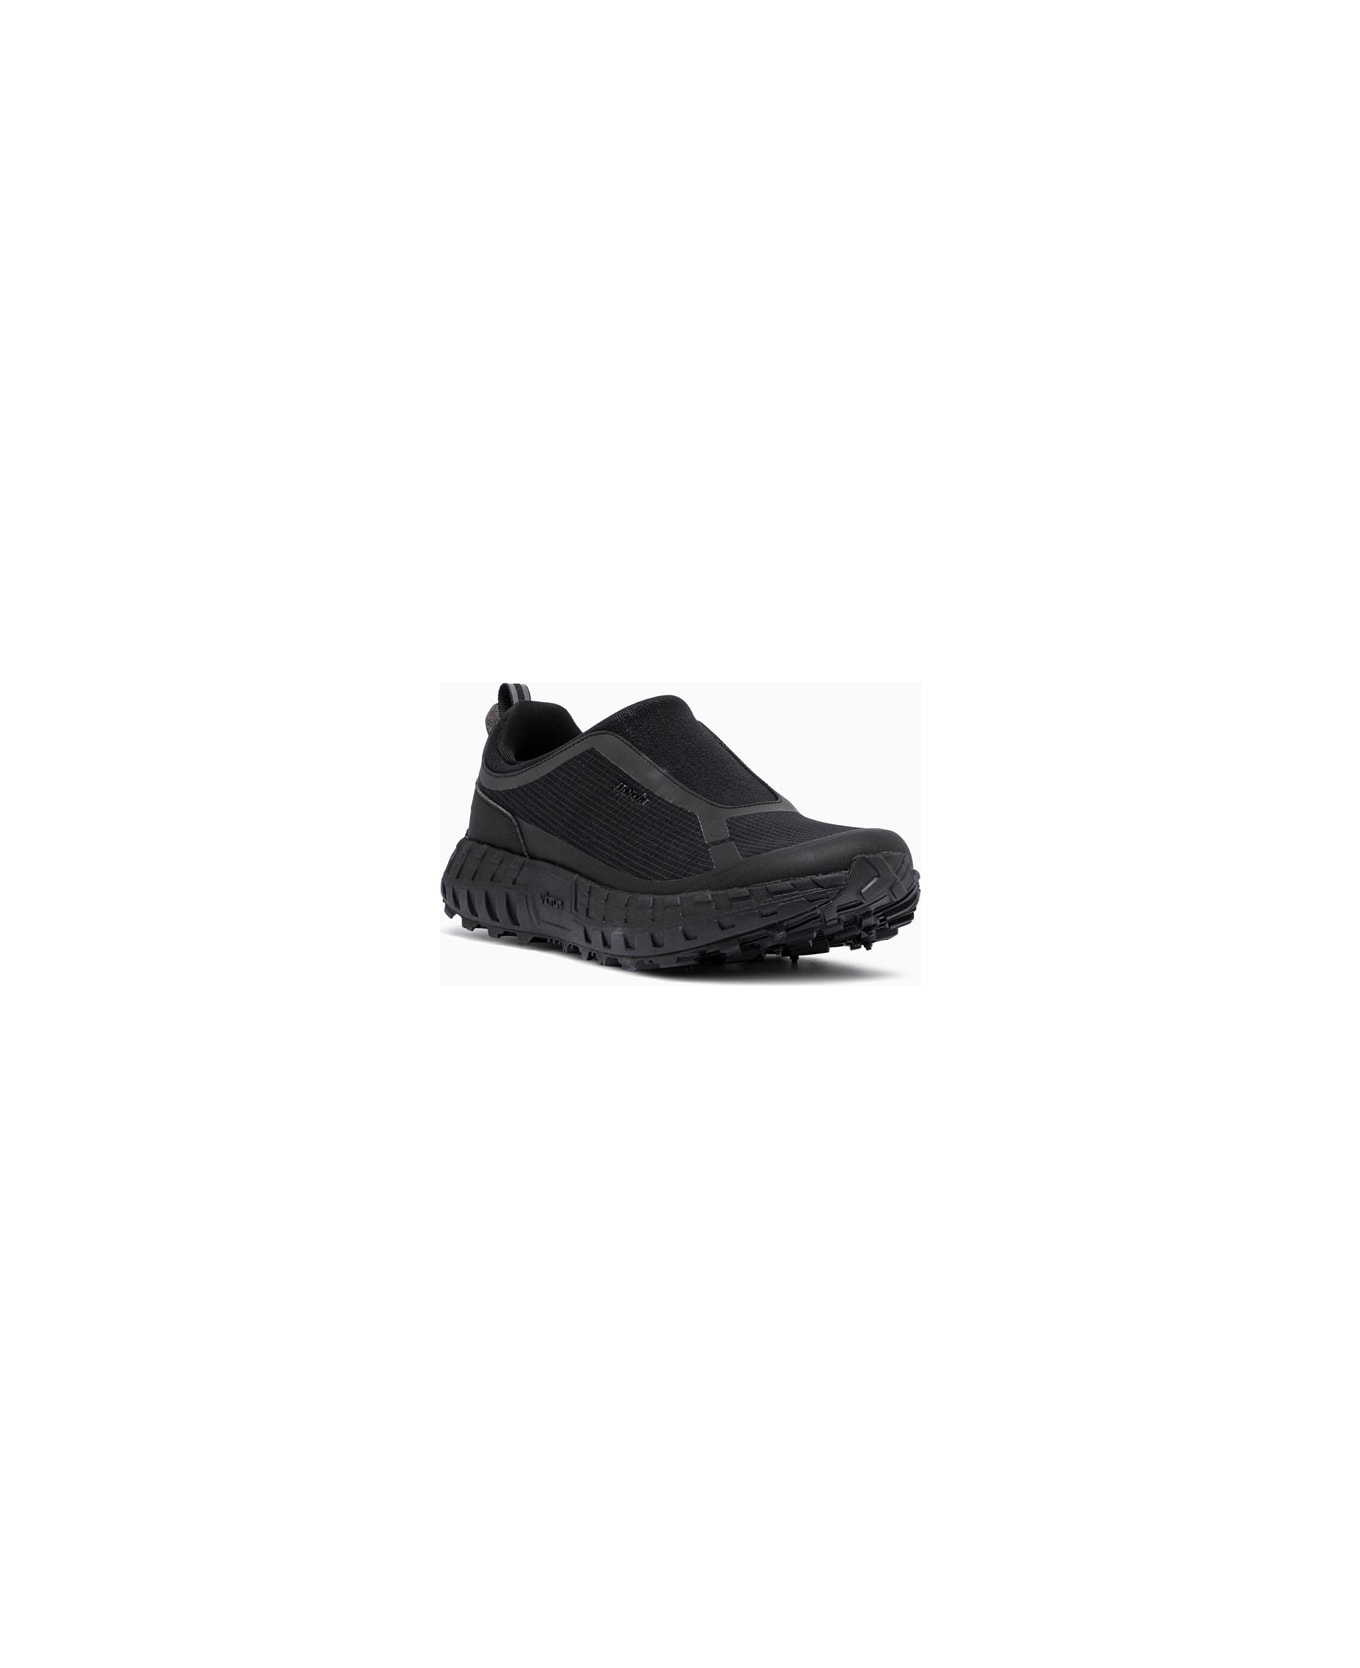 Norda The 003 Pitch Black 2028 Sneakers - Black スニーカー